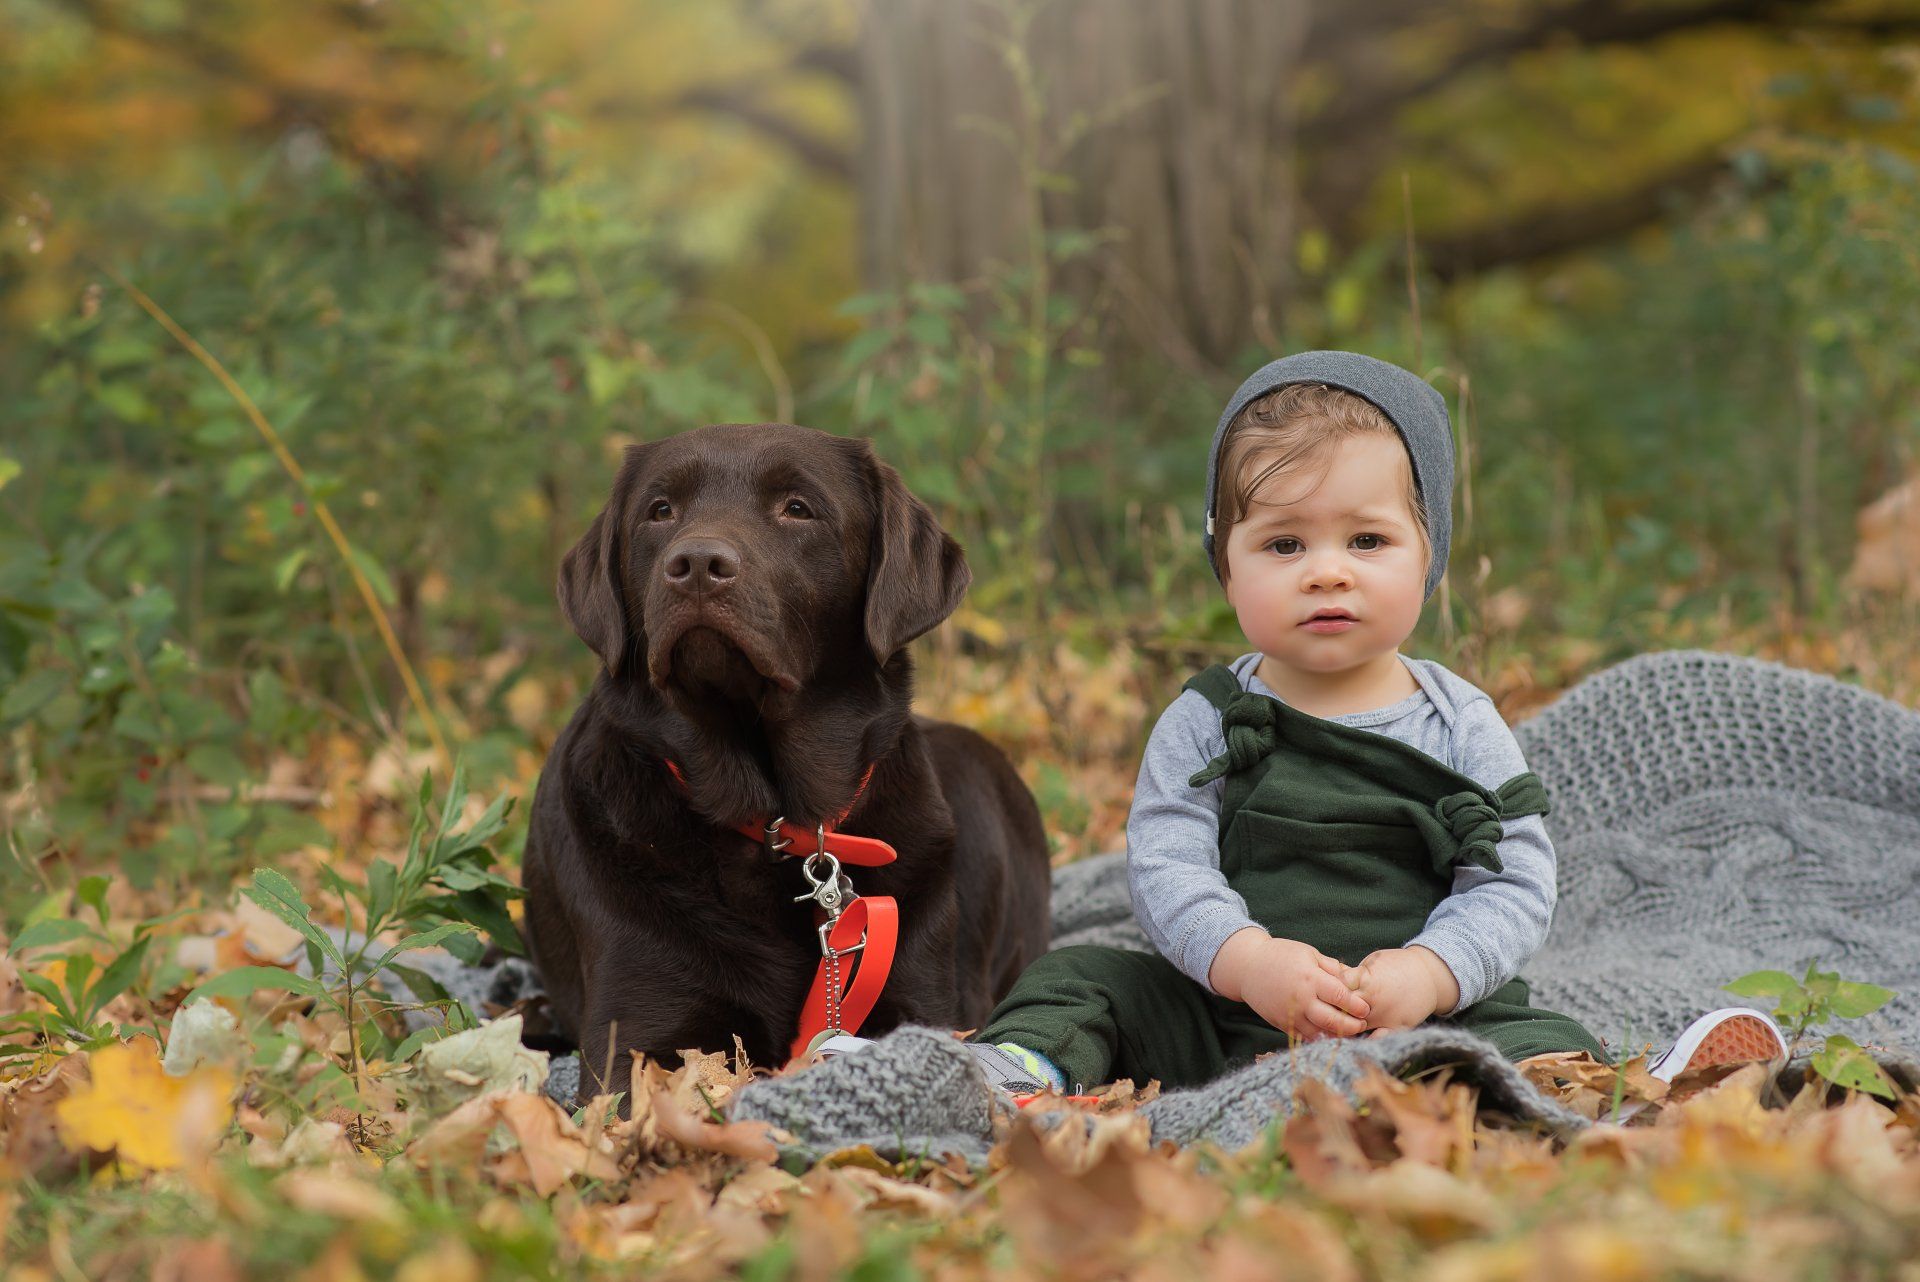 Photo of a toddler sitting next to a large dog in a leaf covered field